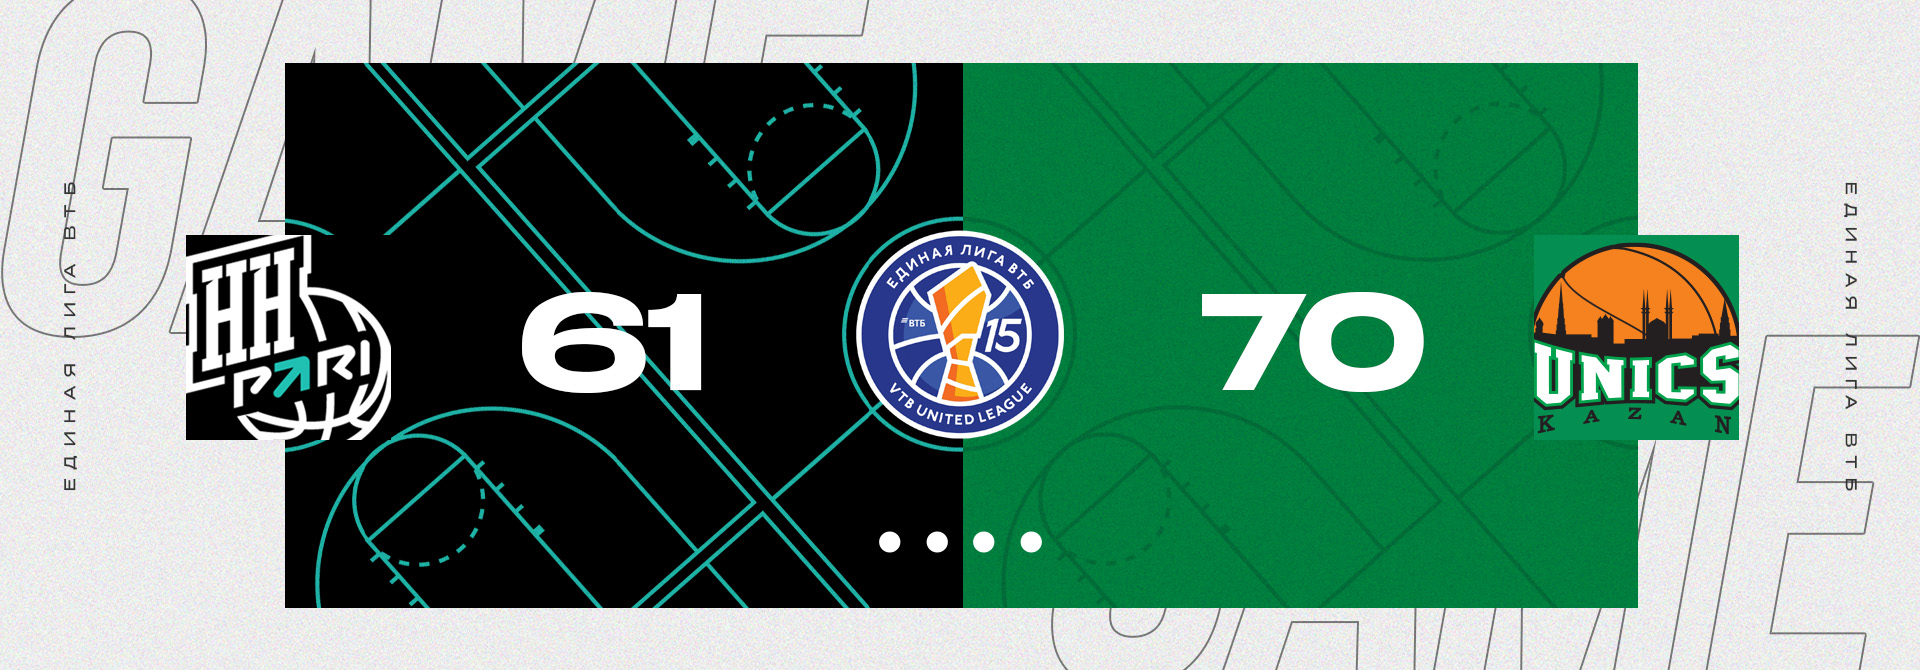 We end the year with an away victory over Nizhny Novgorod!